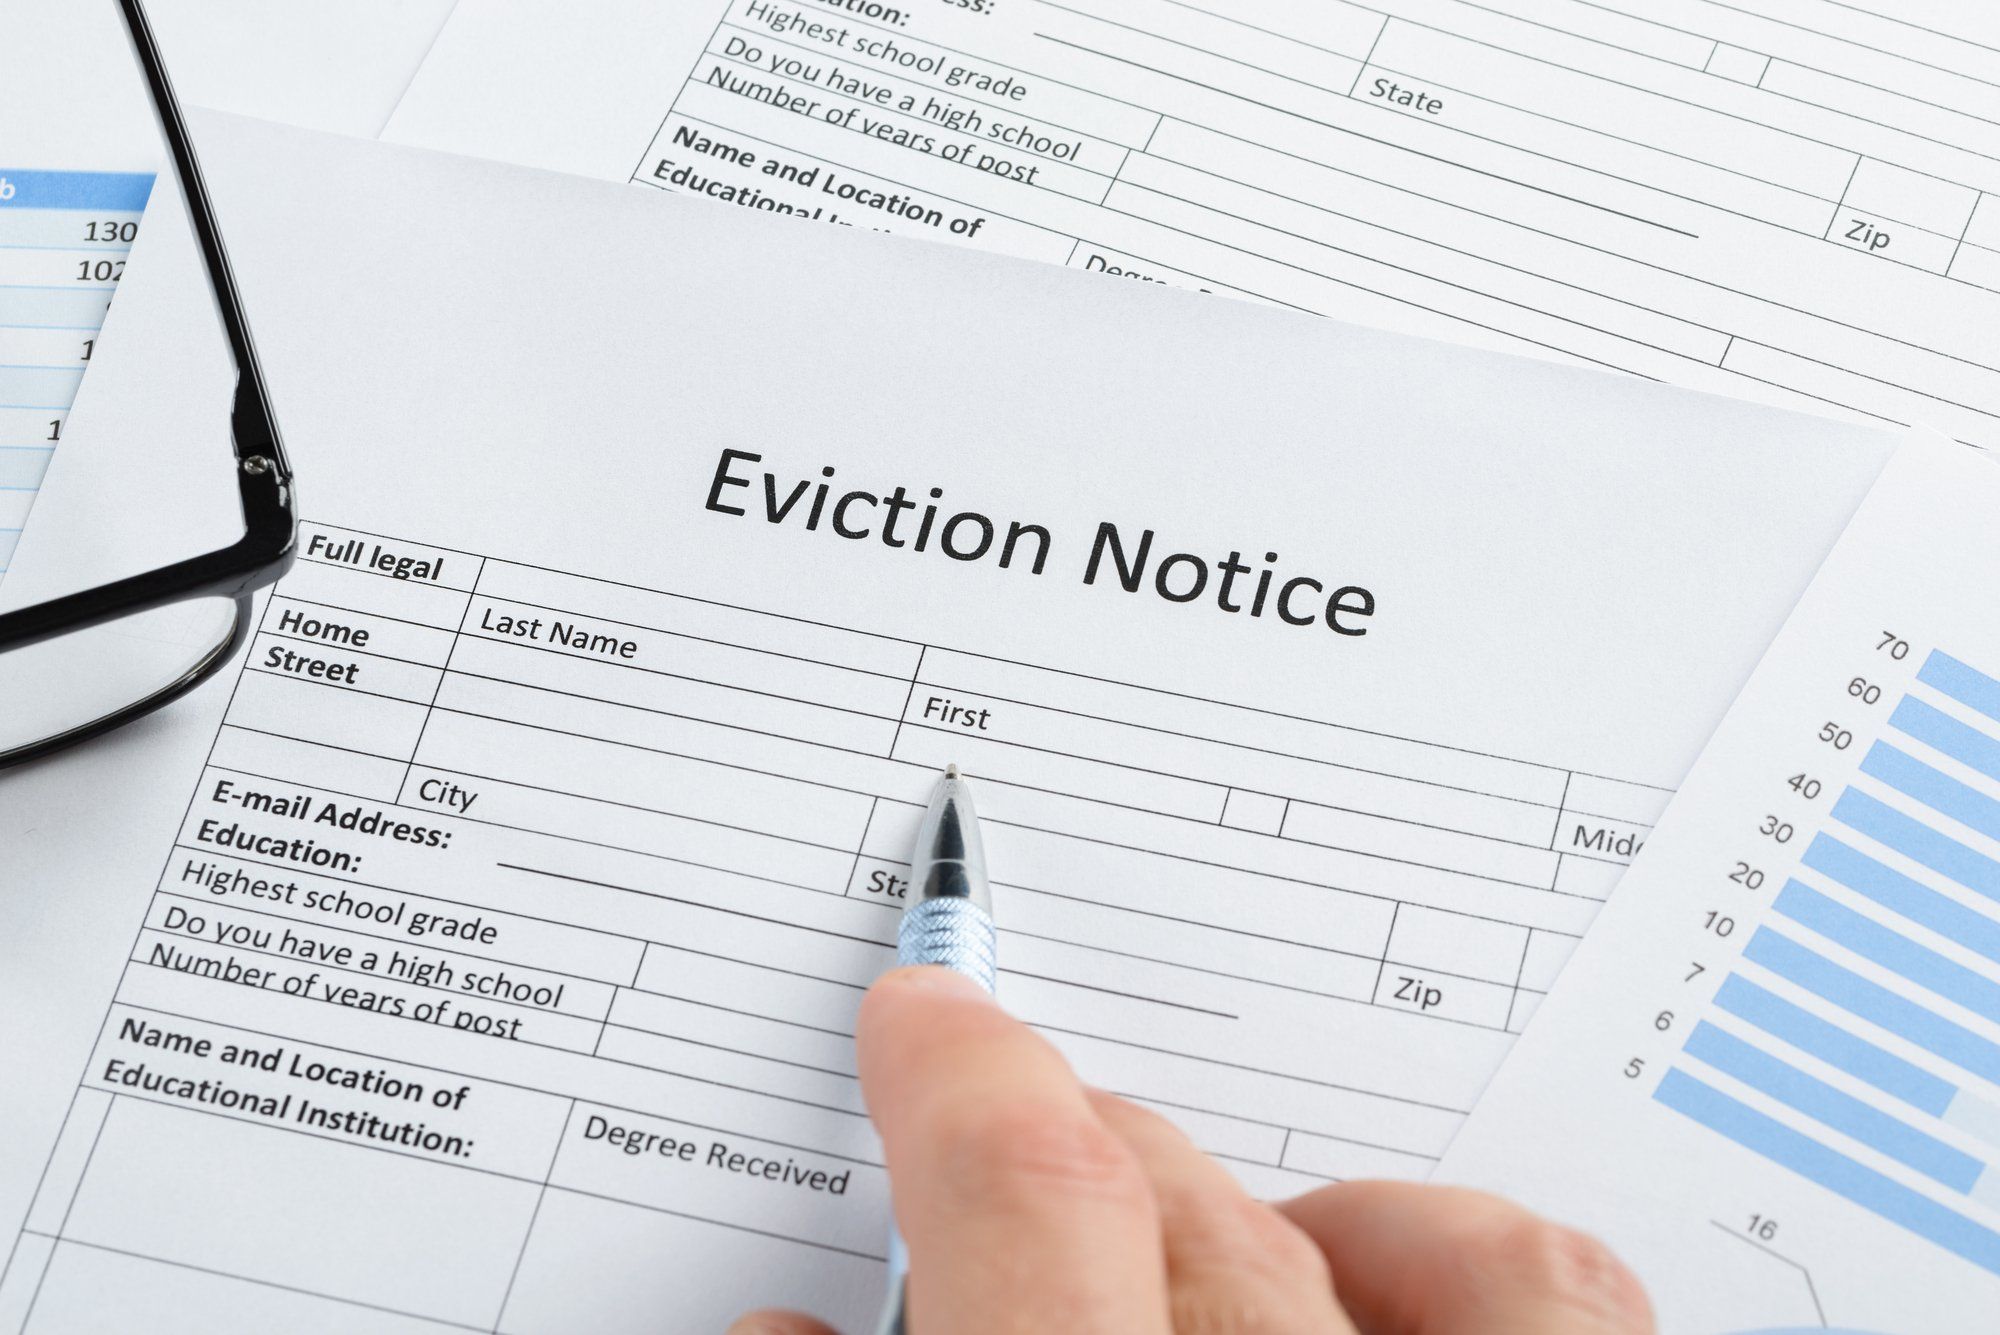 Judge Rules CDC can't enforce national eviction freeze